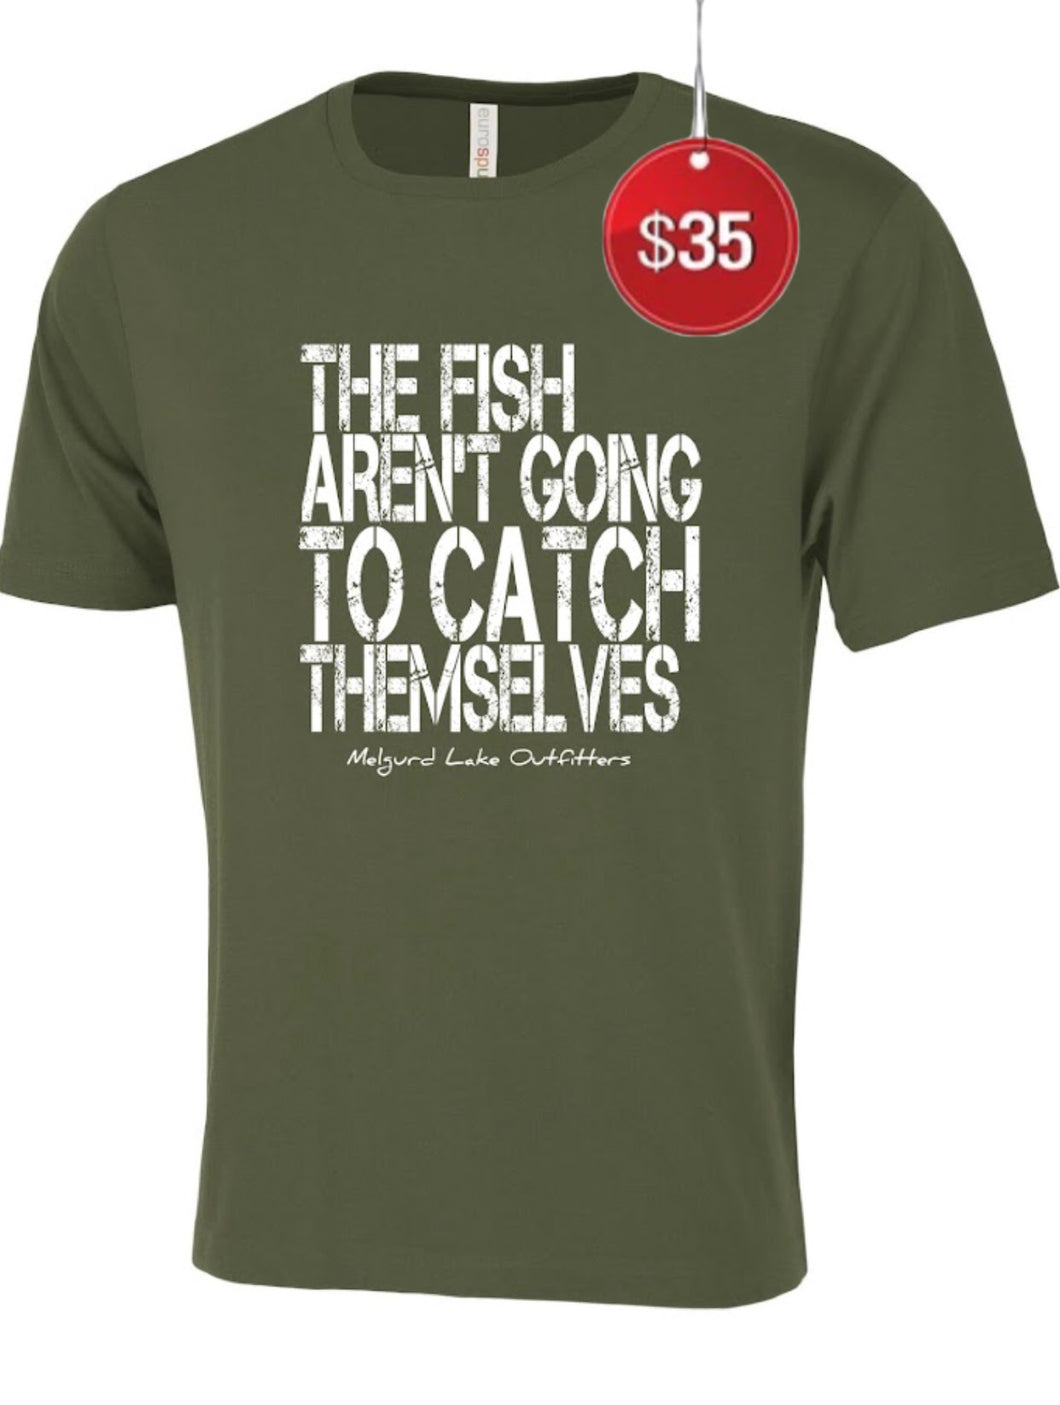 Limited Edition Catch Themselves Green Tee - $15 Discount taken at checkout